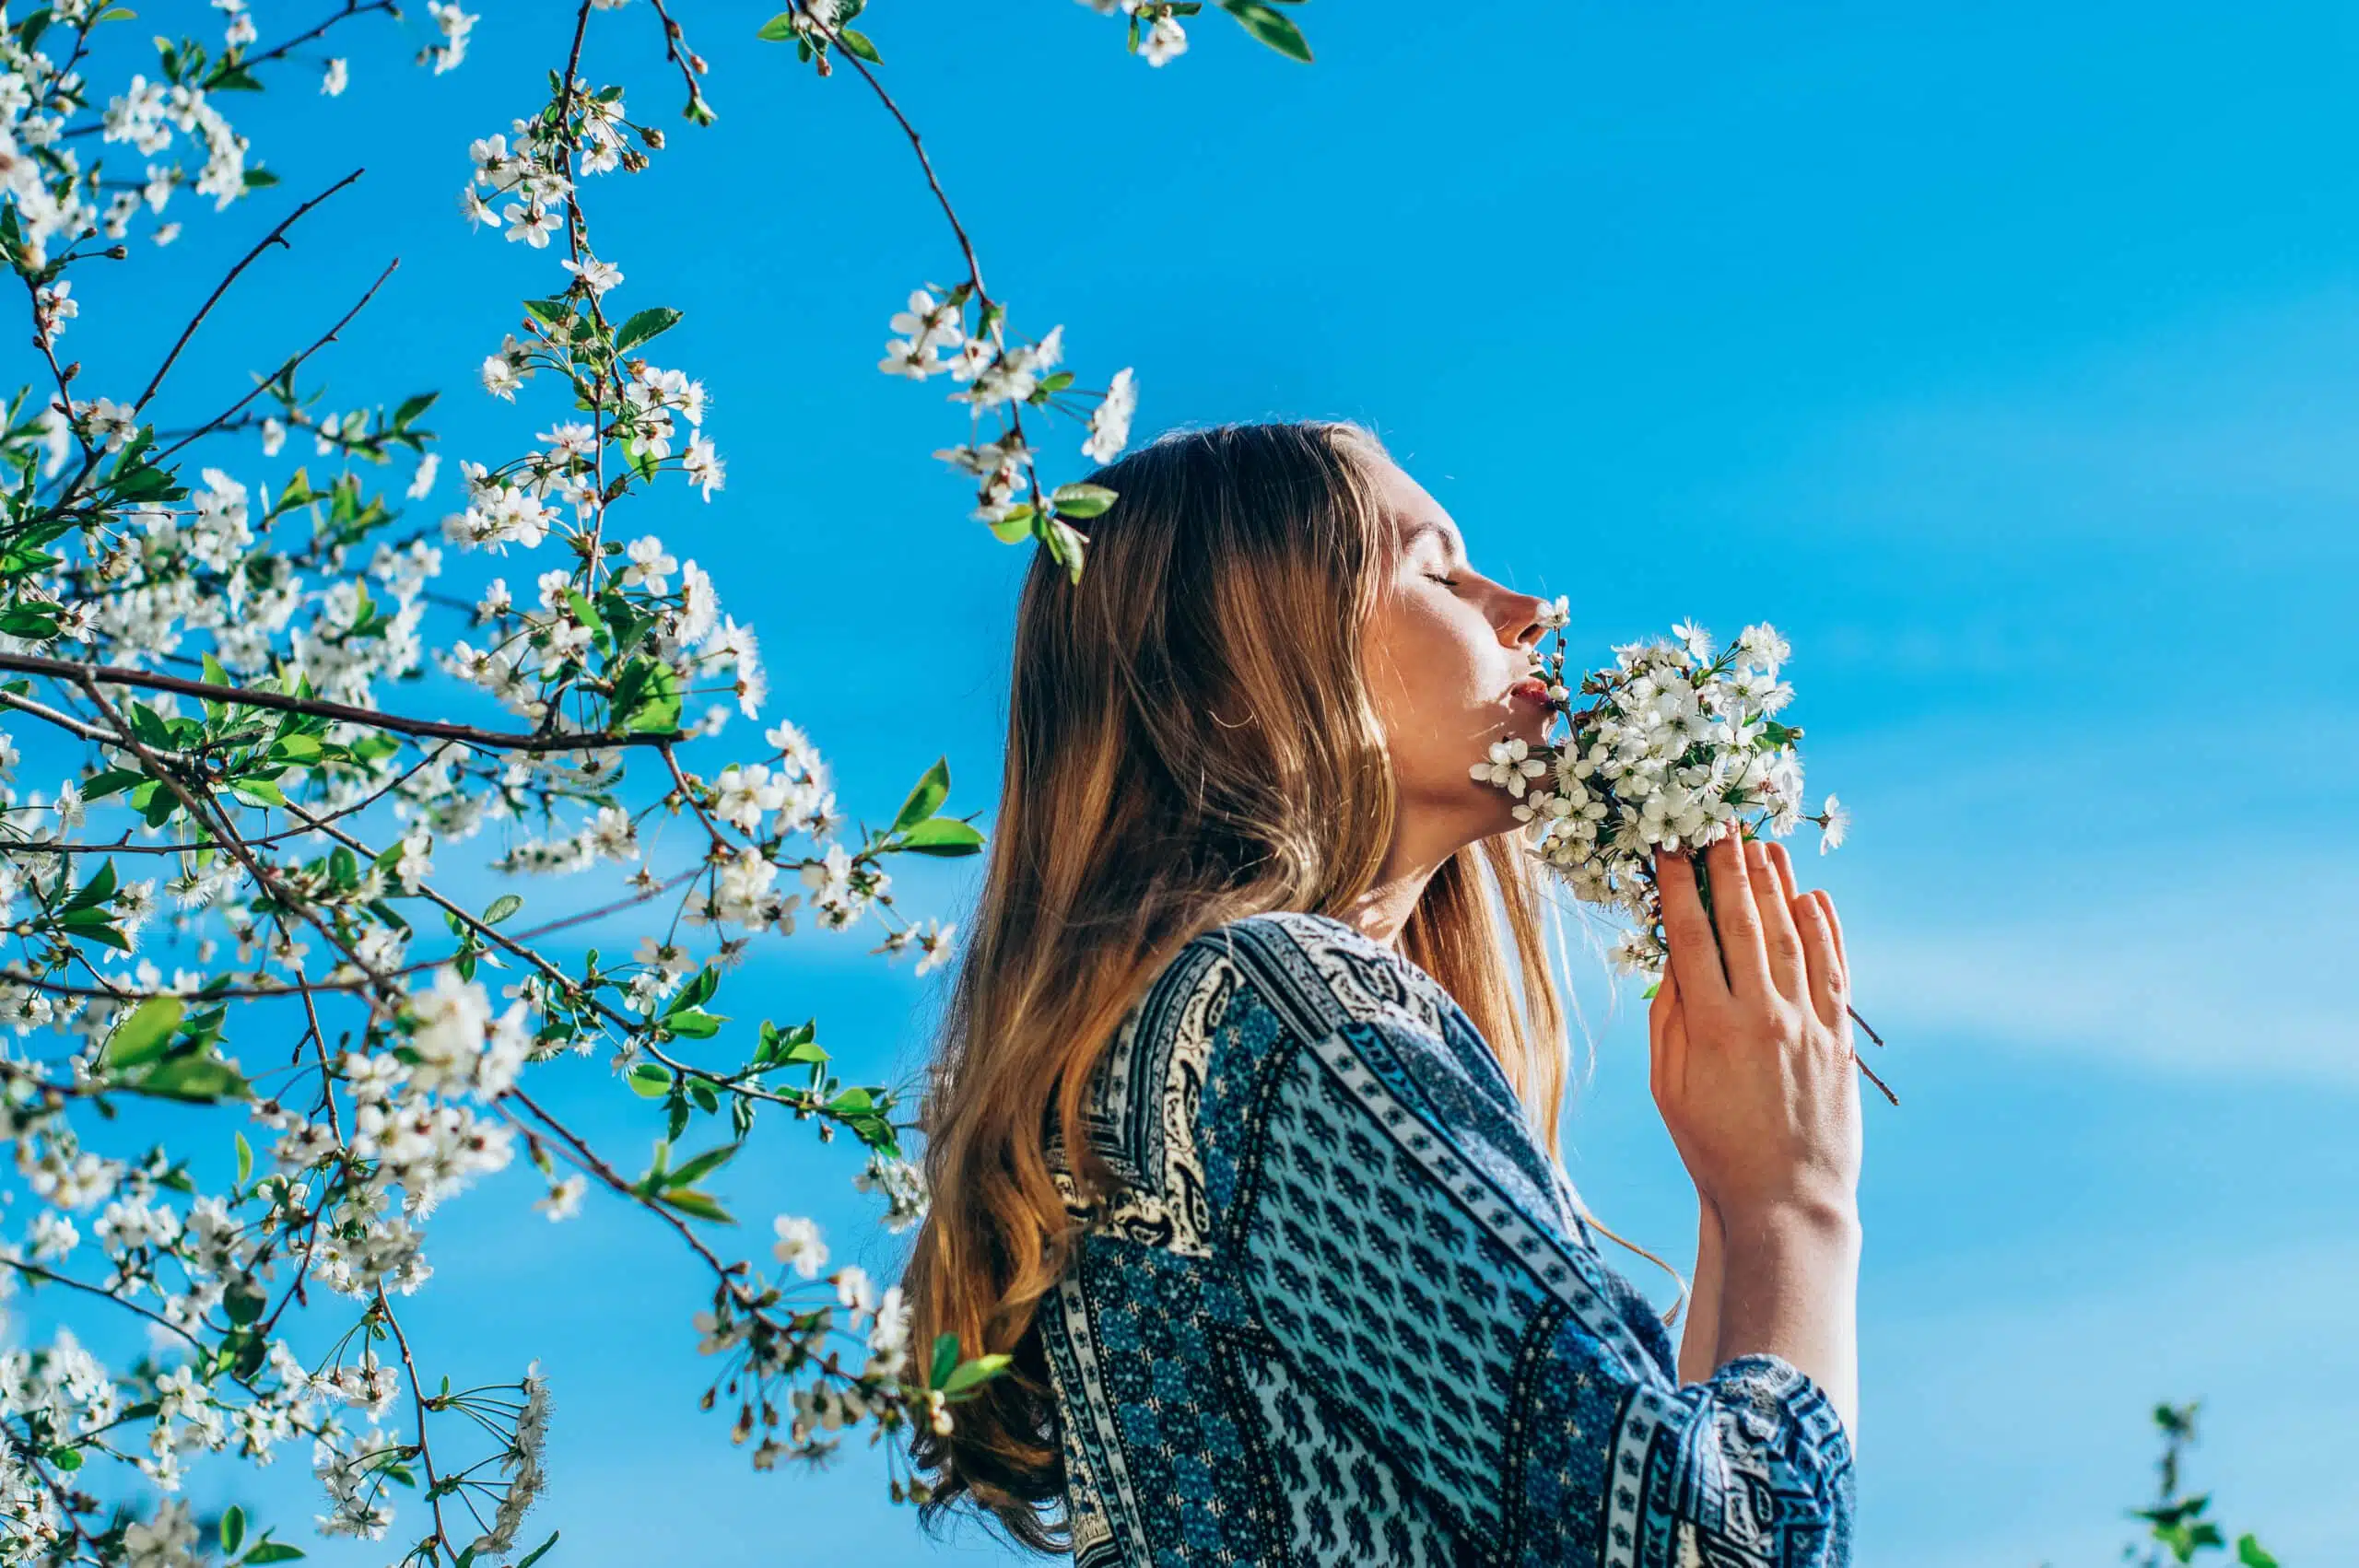 young girl in cherry garden smelling a bouquet of flowers, with the bright blue sky above